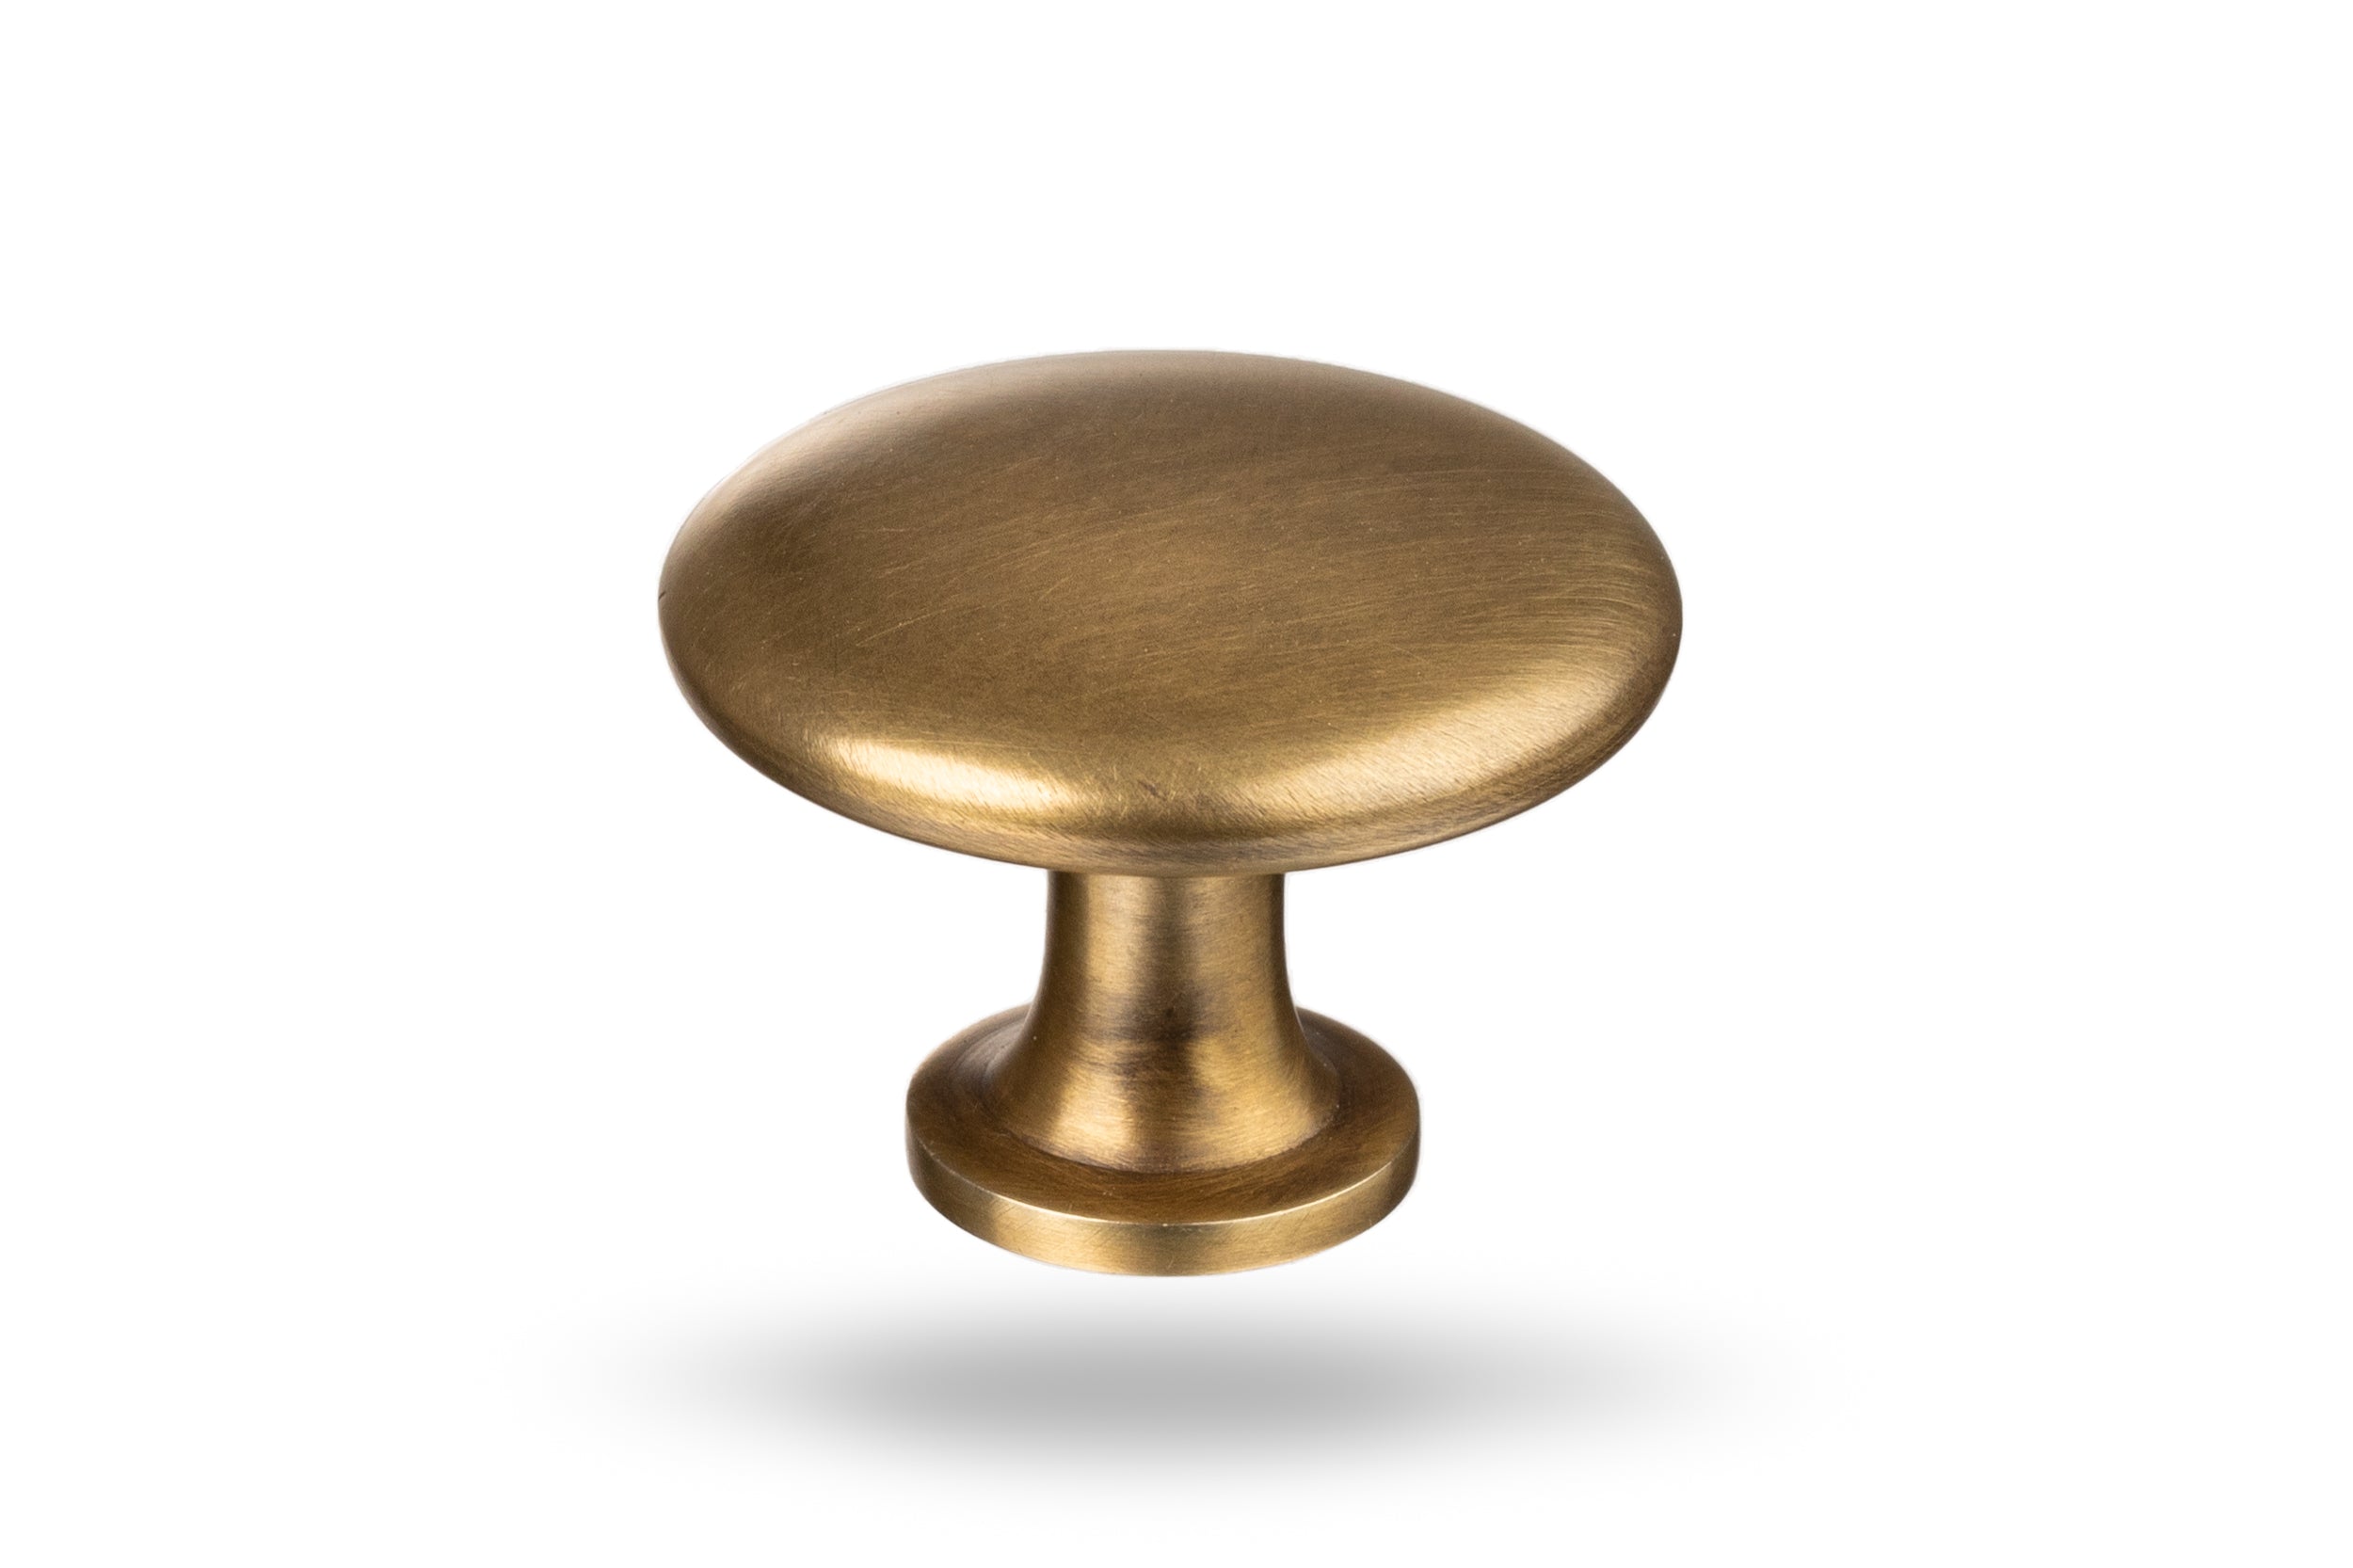 Solid brass kitchen knobs/handles by The Foundryman.